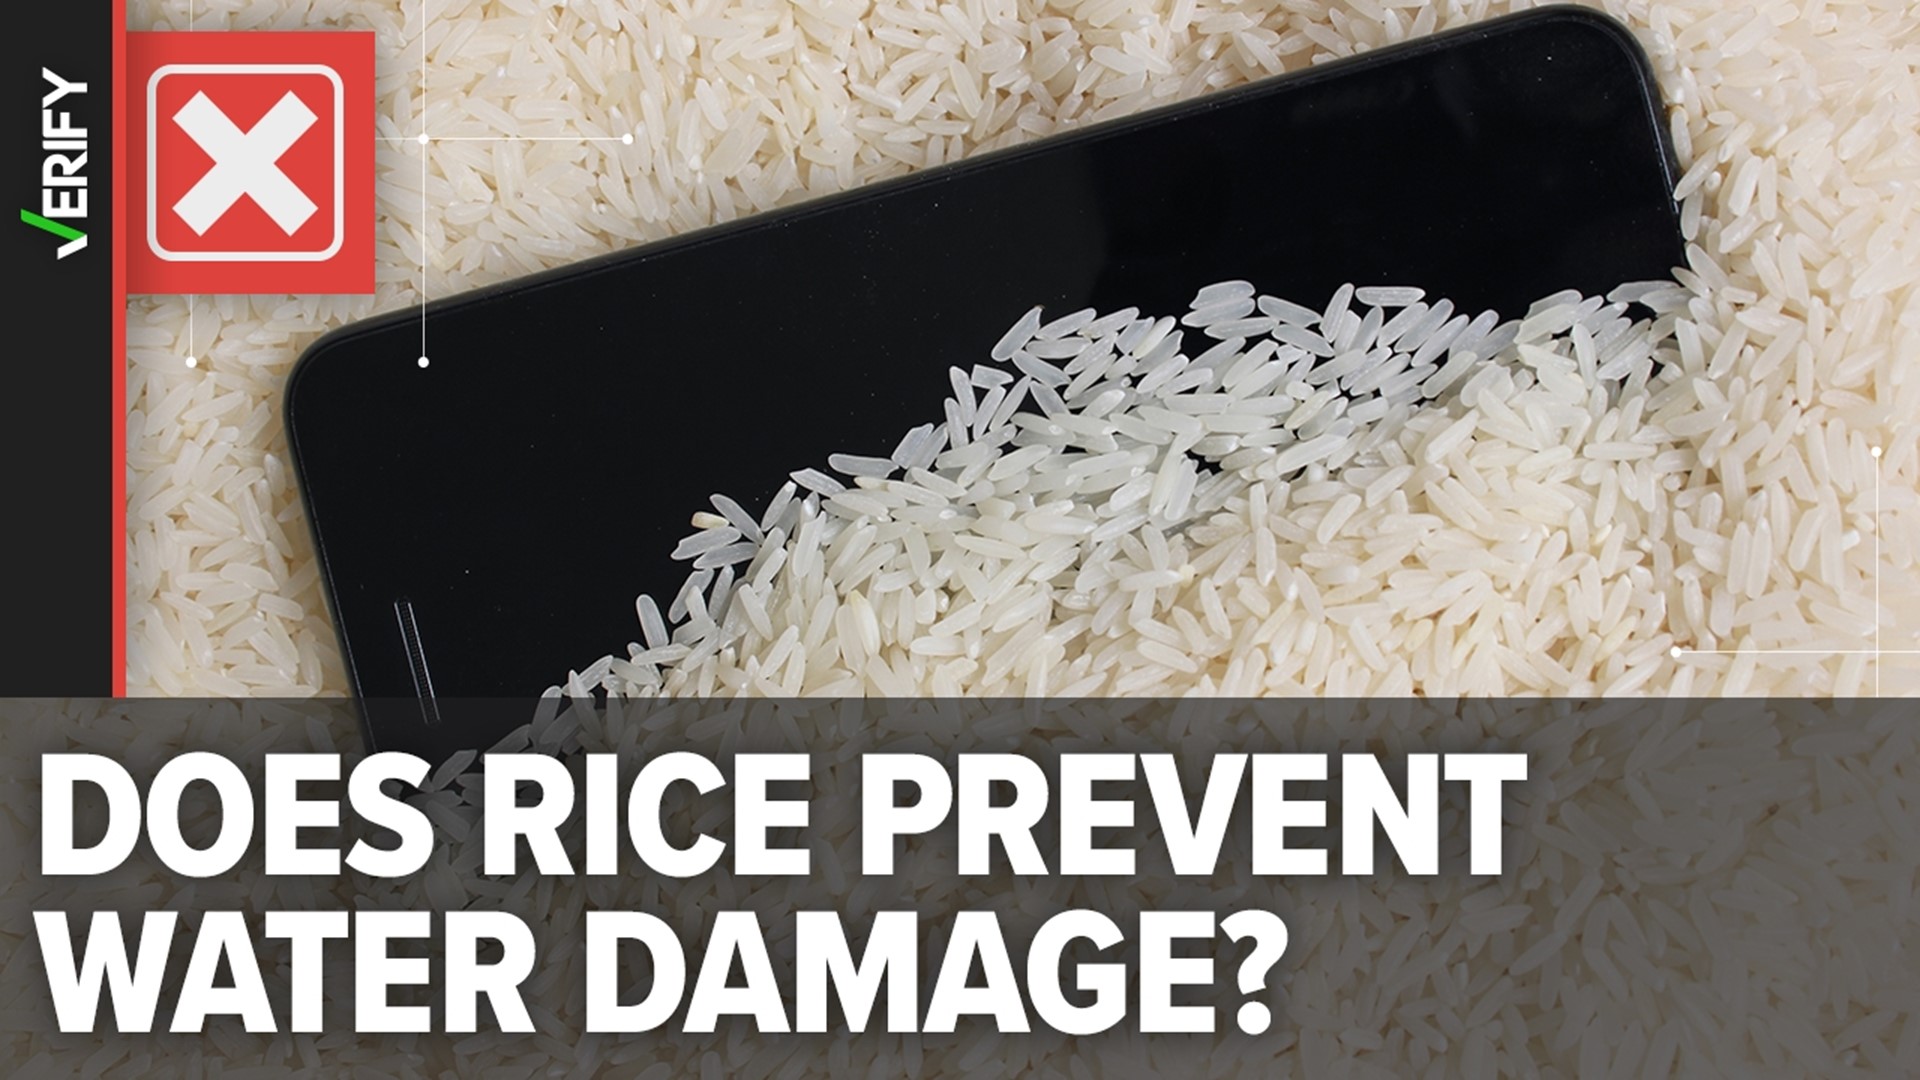 Putting a wet cell phone in rice to dry doesn’t protect it. It can cause problems for a water-damaged device, like corrosion or clogged ports.